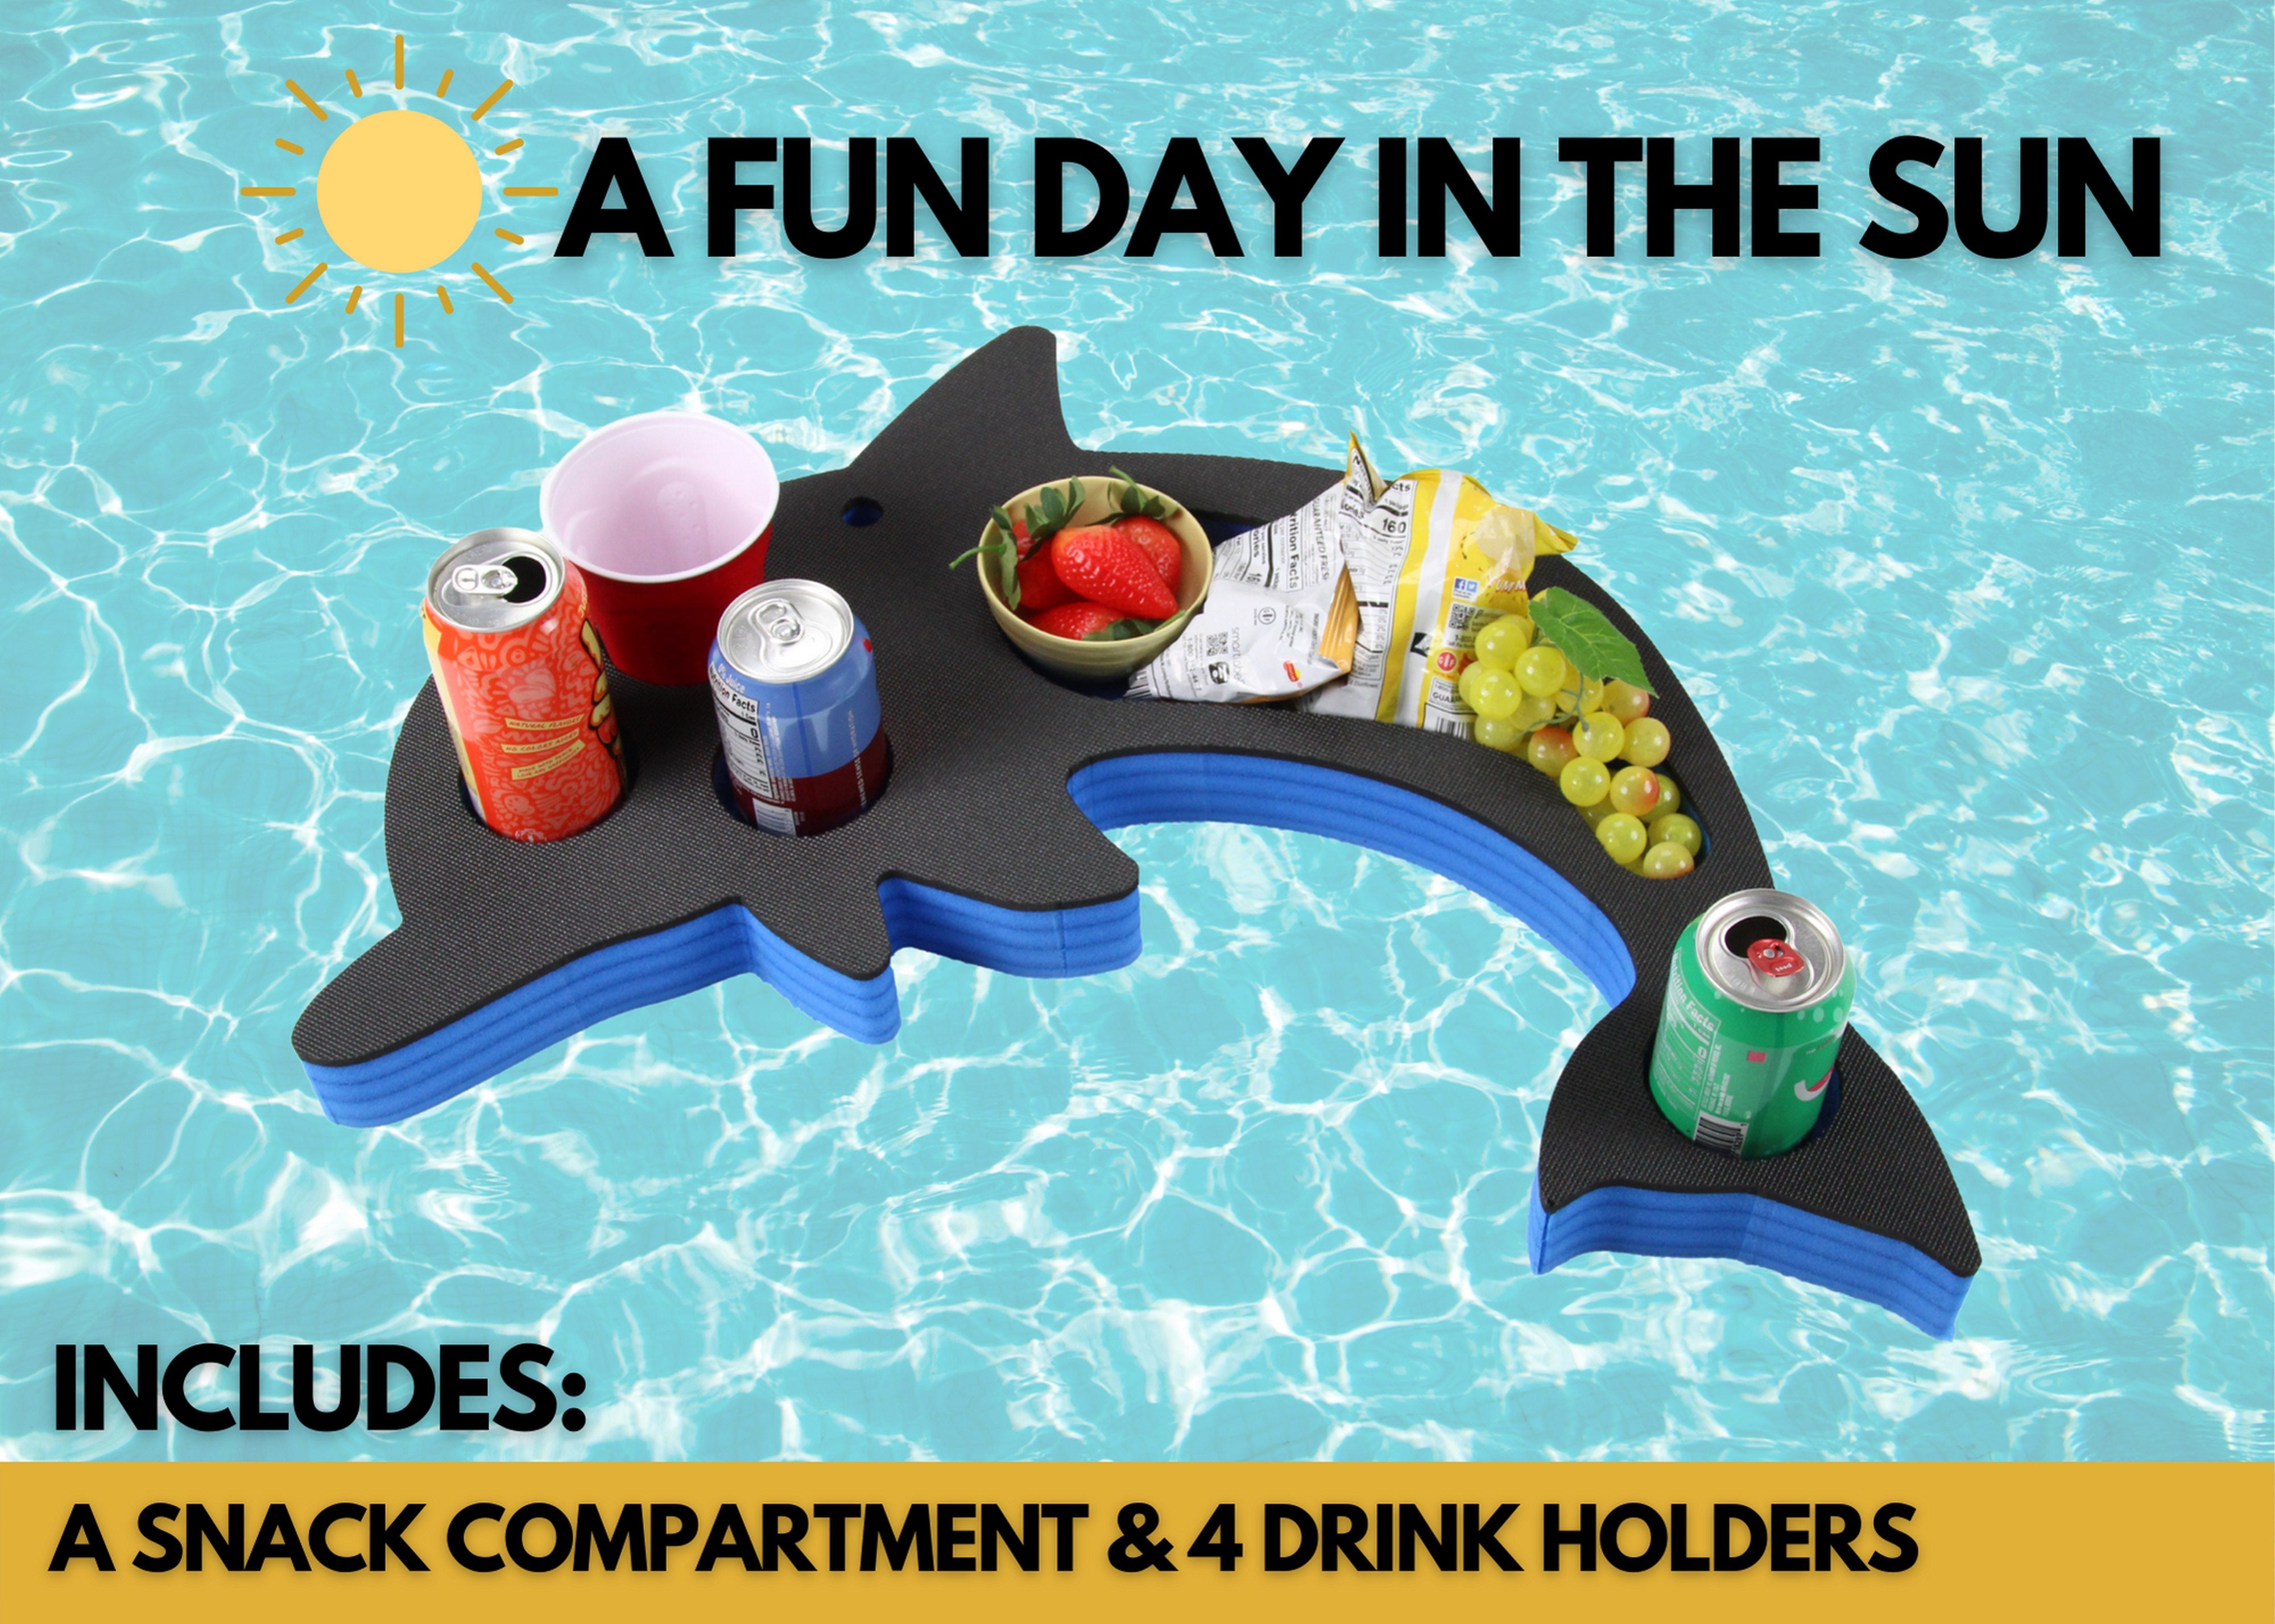 Dolphin Shaped Drink Holder Refreshment Table Tray for Pool or Beach Party Float Lounge Durable 5 Compartment UV Resistant Cup Holders 23.5 Inches